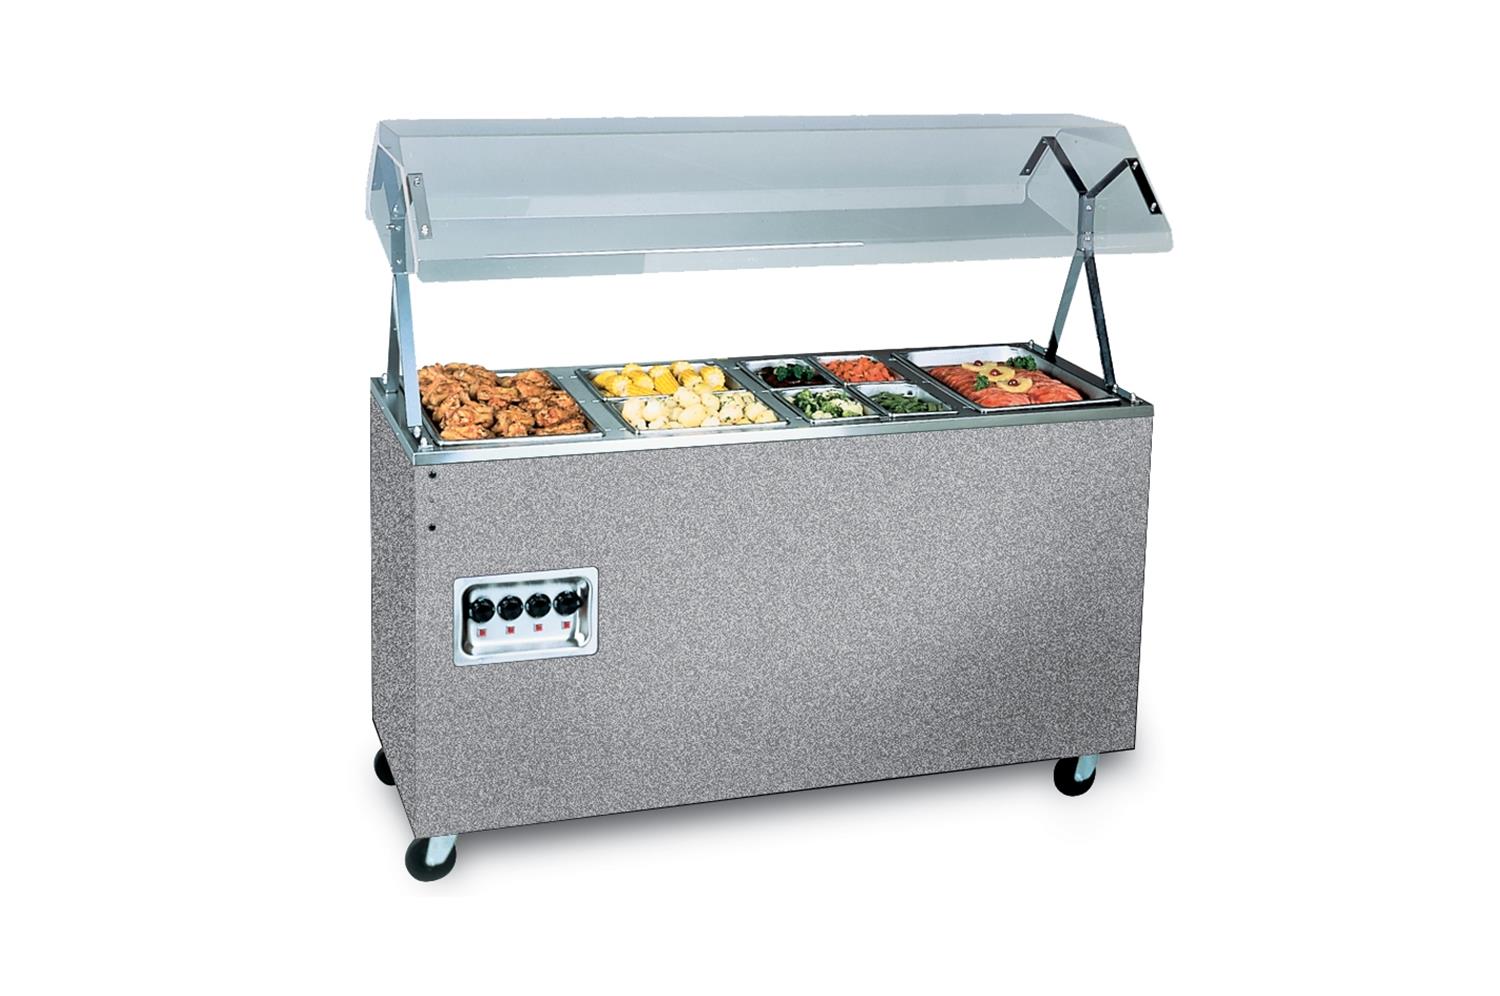 Vollrath 38728W Affordable Portable Hot Food Station, 3 Well